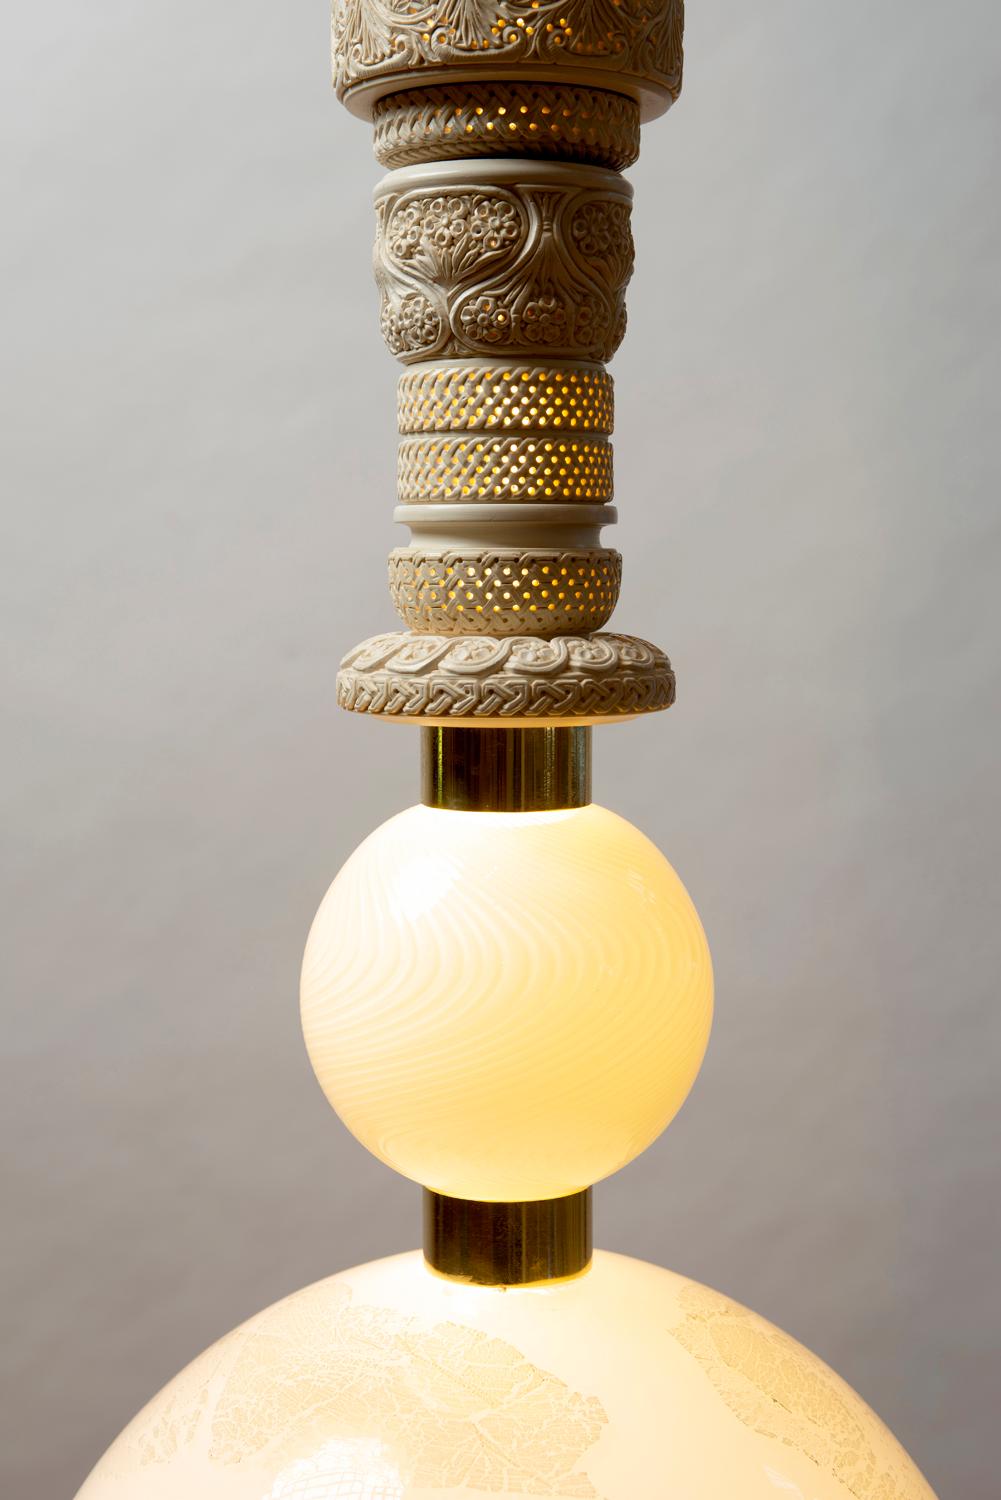 Feyza Kemahlioglu is inspired by the architecture and culture of her native Istanbul. Feyza’s unique lighting sculptures entitled 'Pillars of Meerschaum,’ are studies into the juxtaposition of tradition and modernity. The leading material in her new